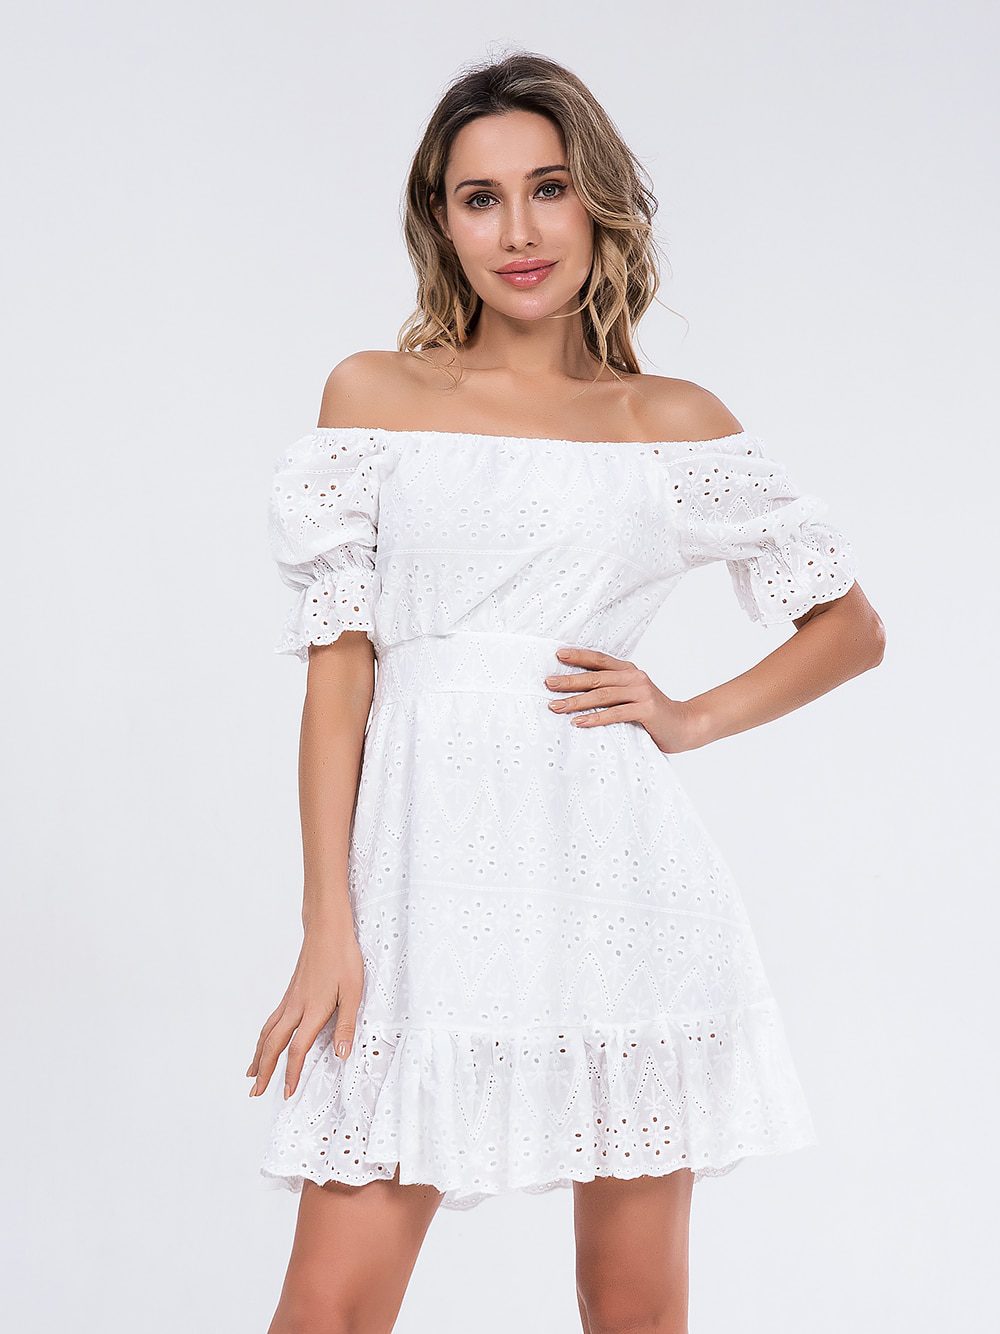 High Waist Ruffled Lace Up Hollow Out A-Line White Mini Dress in Dresses